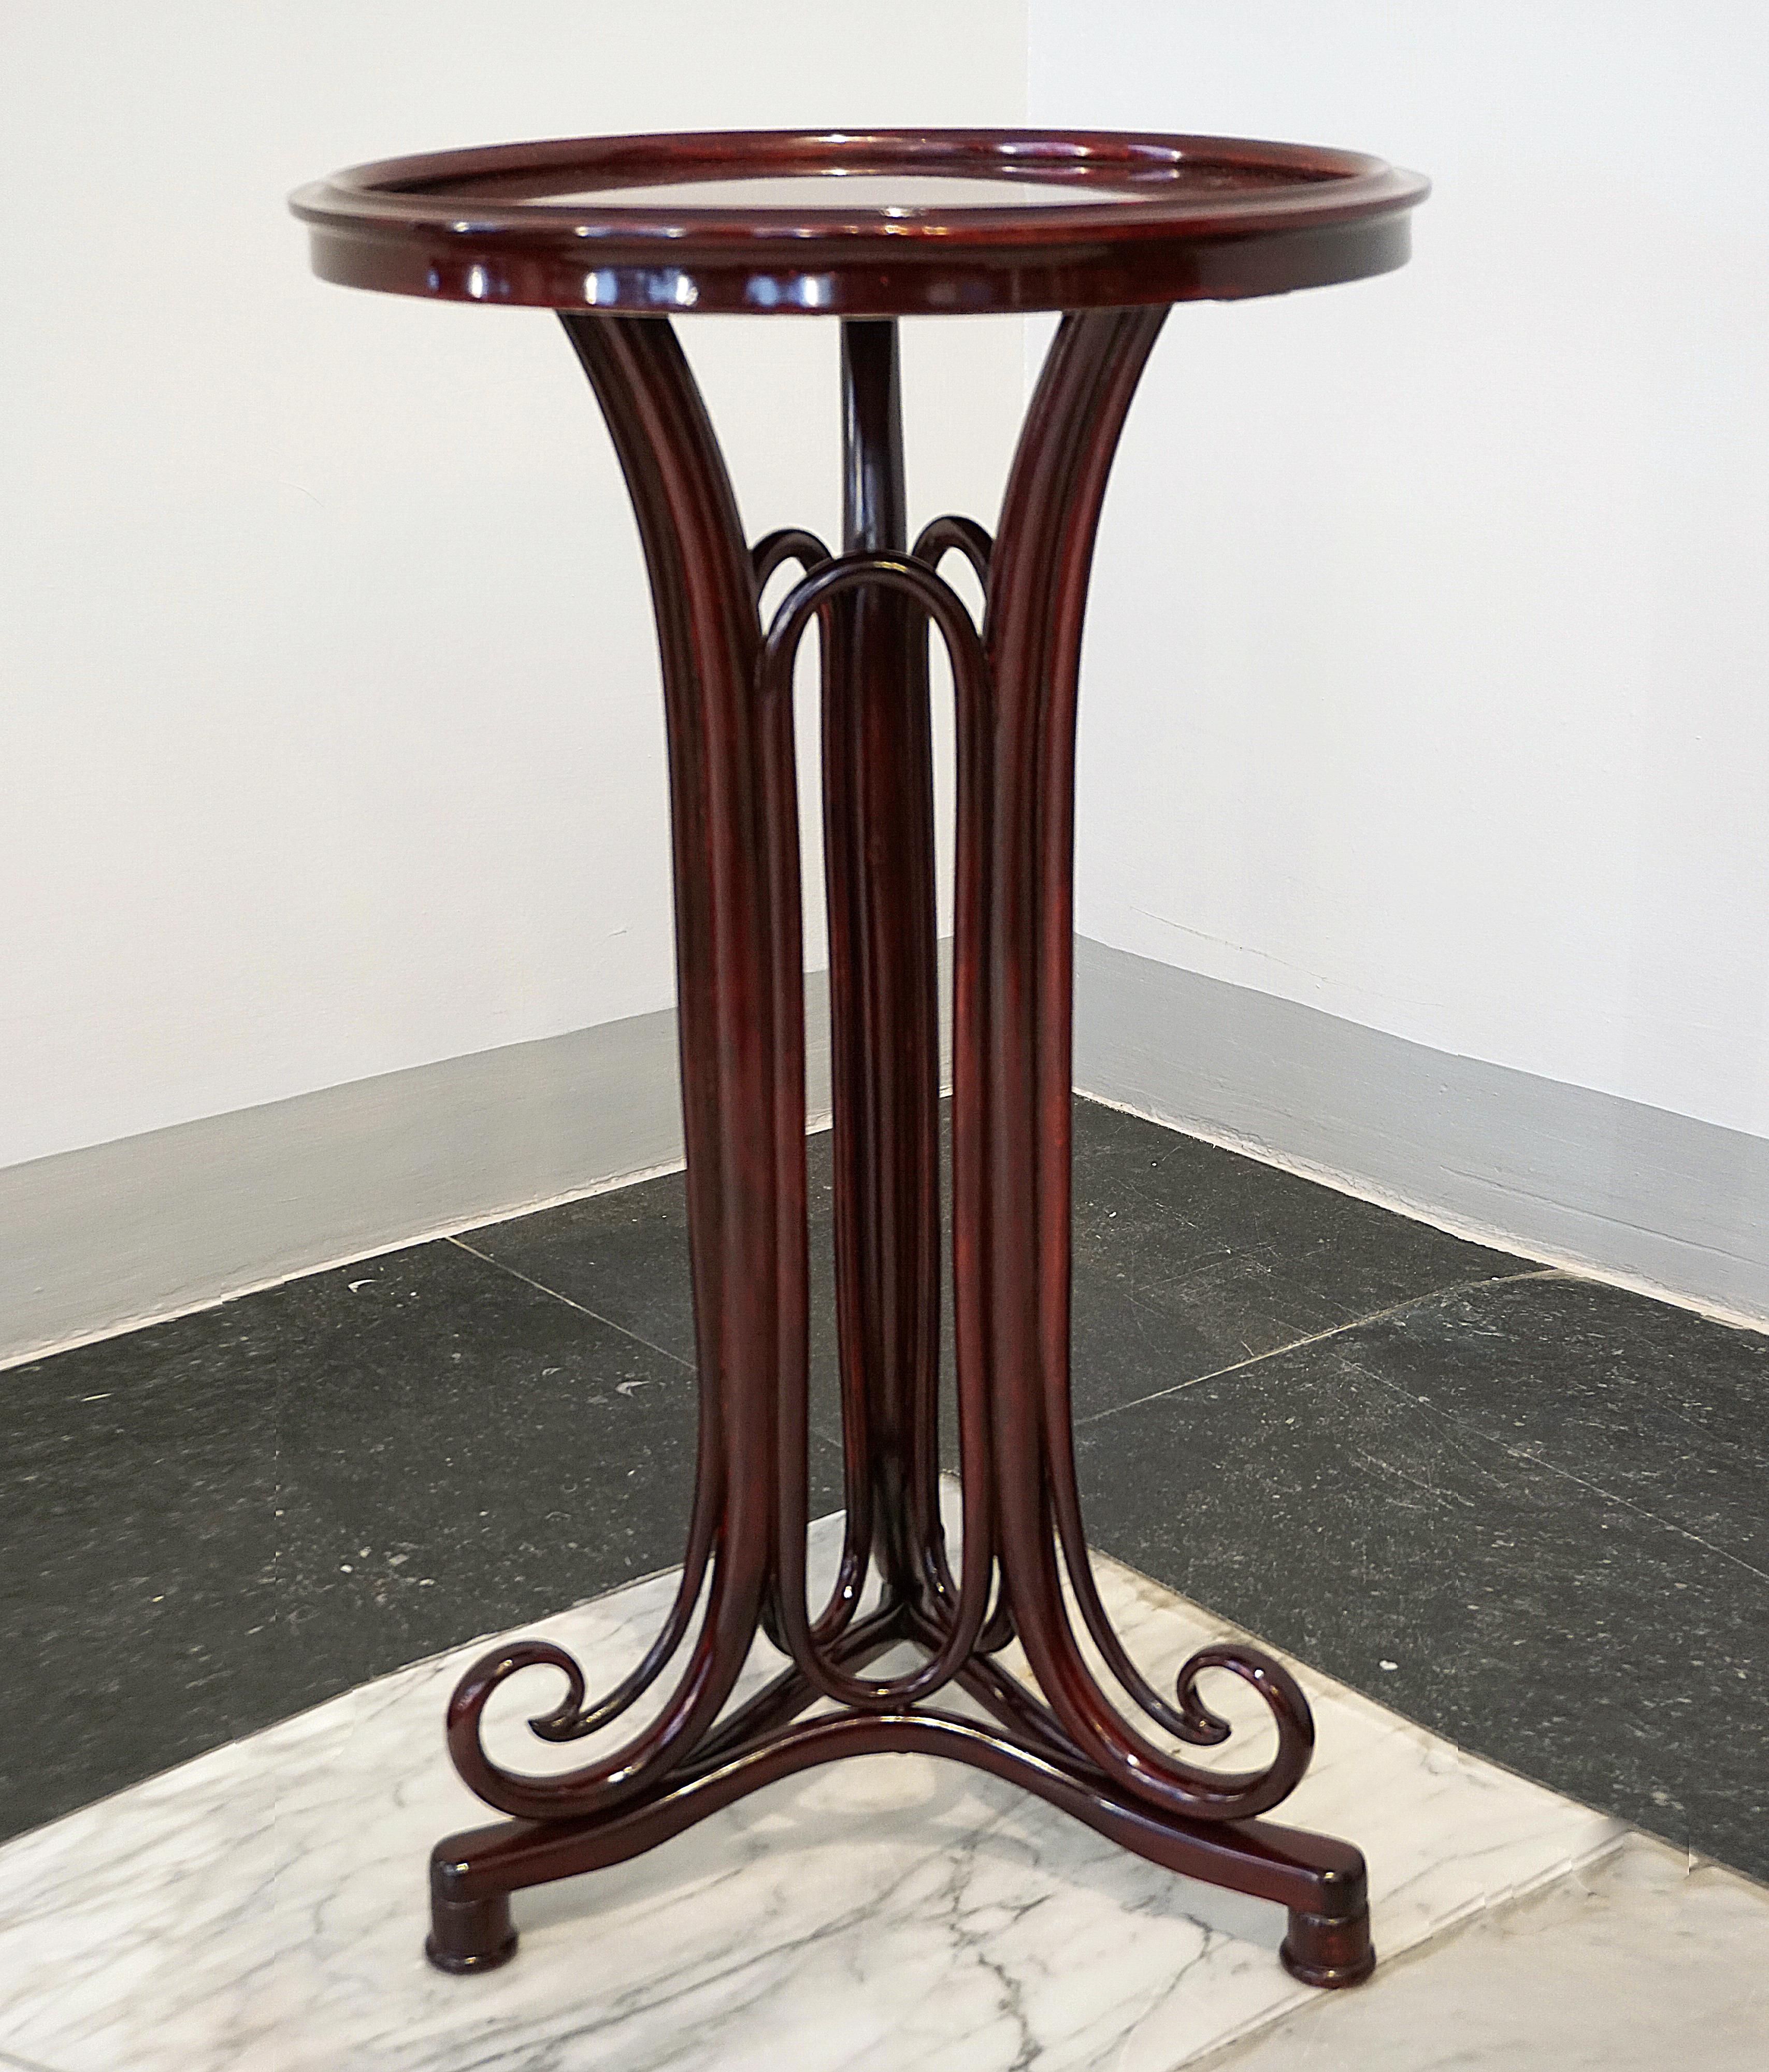 Elegant saloon table with a round, original table top with edging to prevent rolling, decorative and elaborate bentwood struts and applications with volutes on the three-sided foot.
Beautifully designed, handcrafted furniture with bentwood